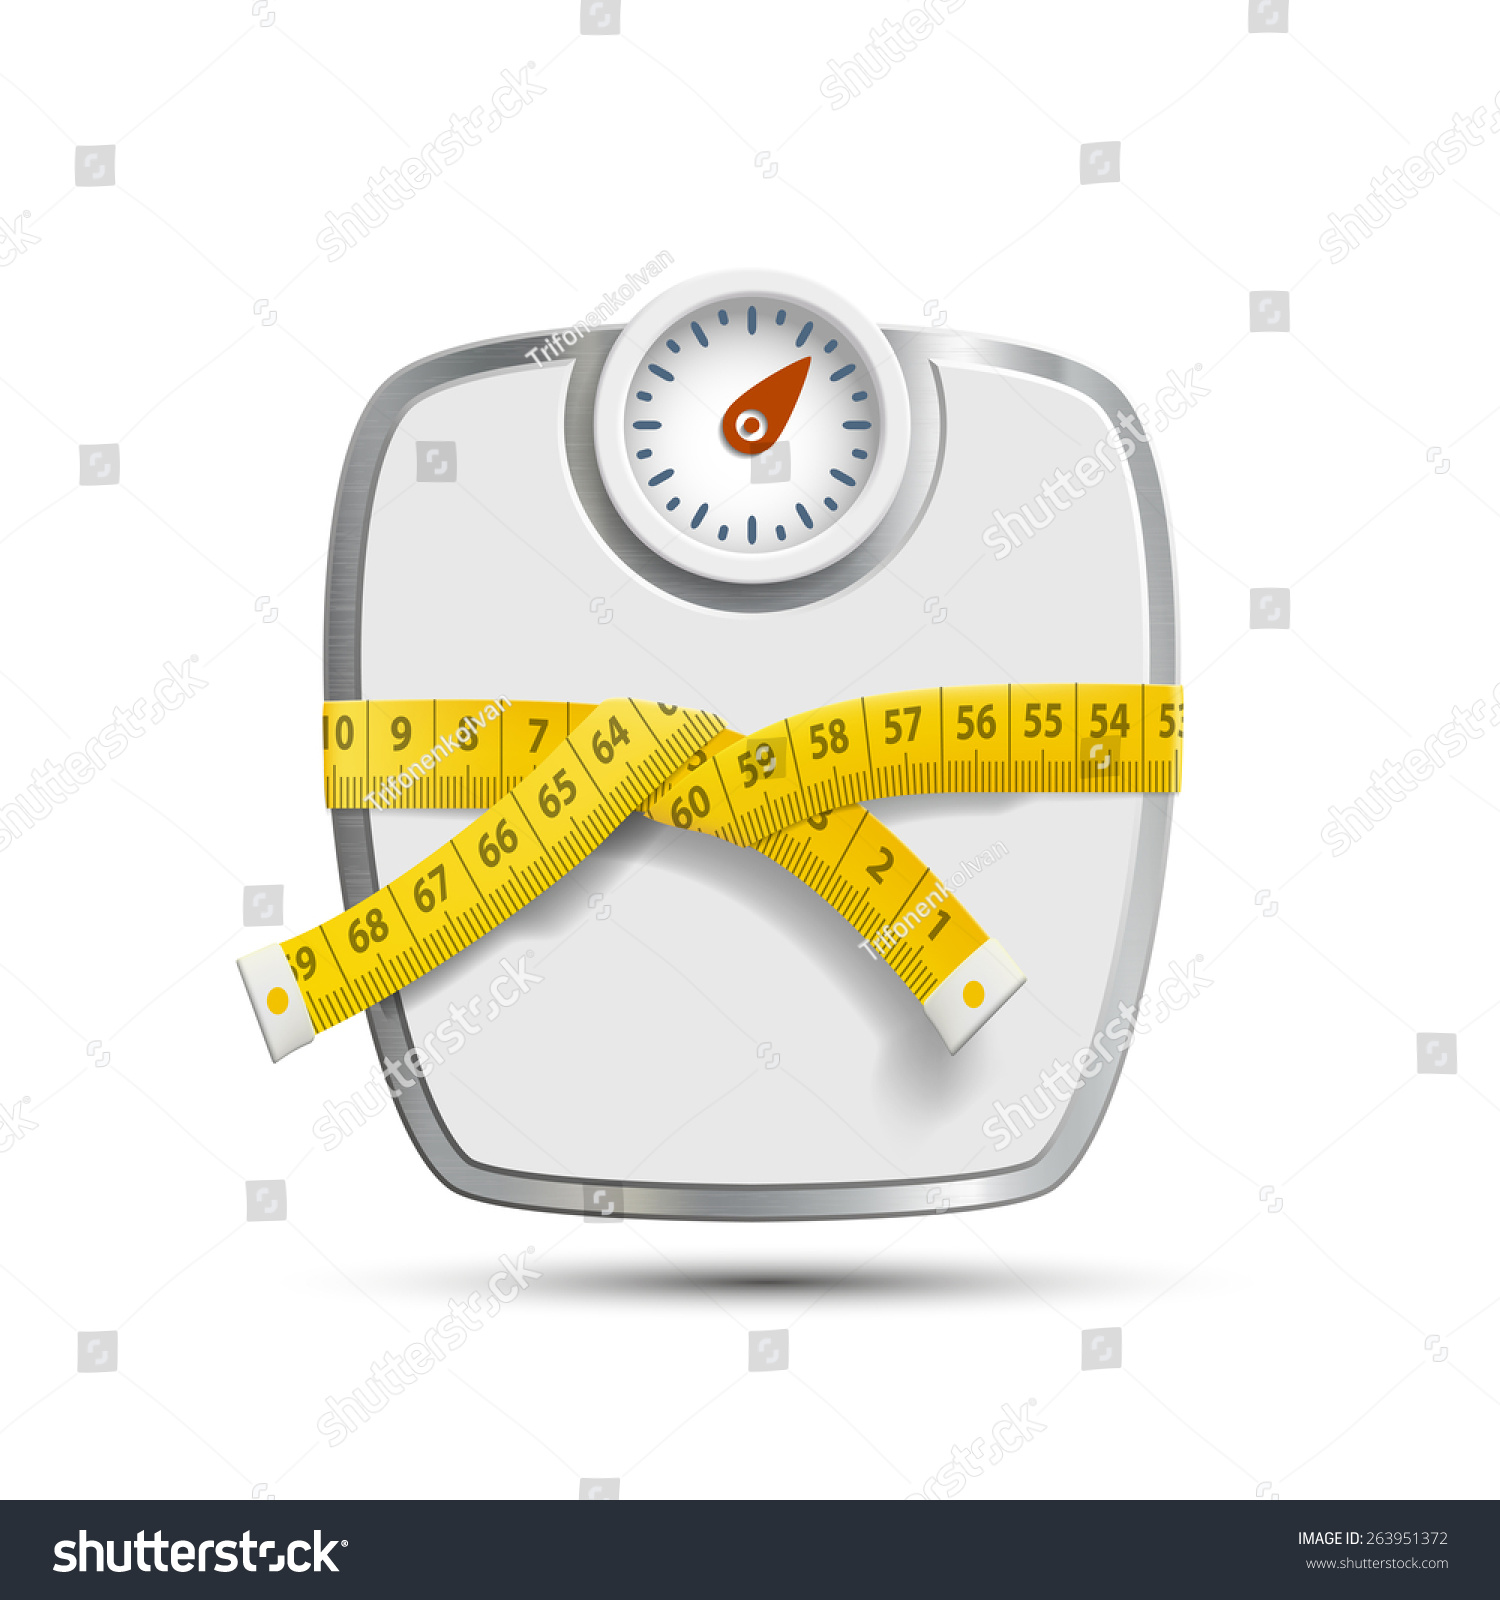 SVG of Scales for weighing with the measuring tape. Vector image. svg